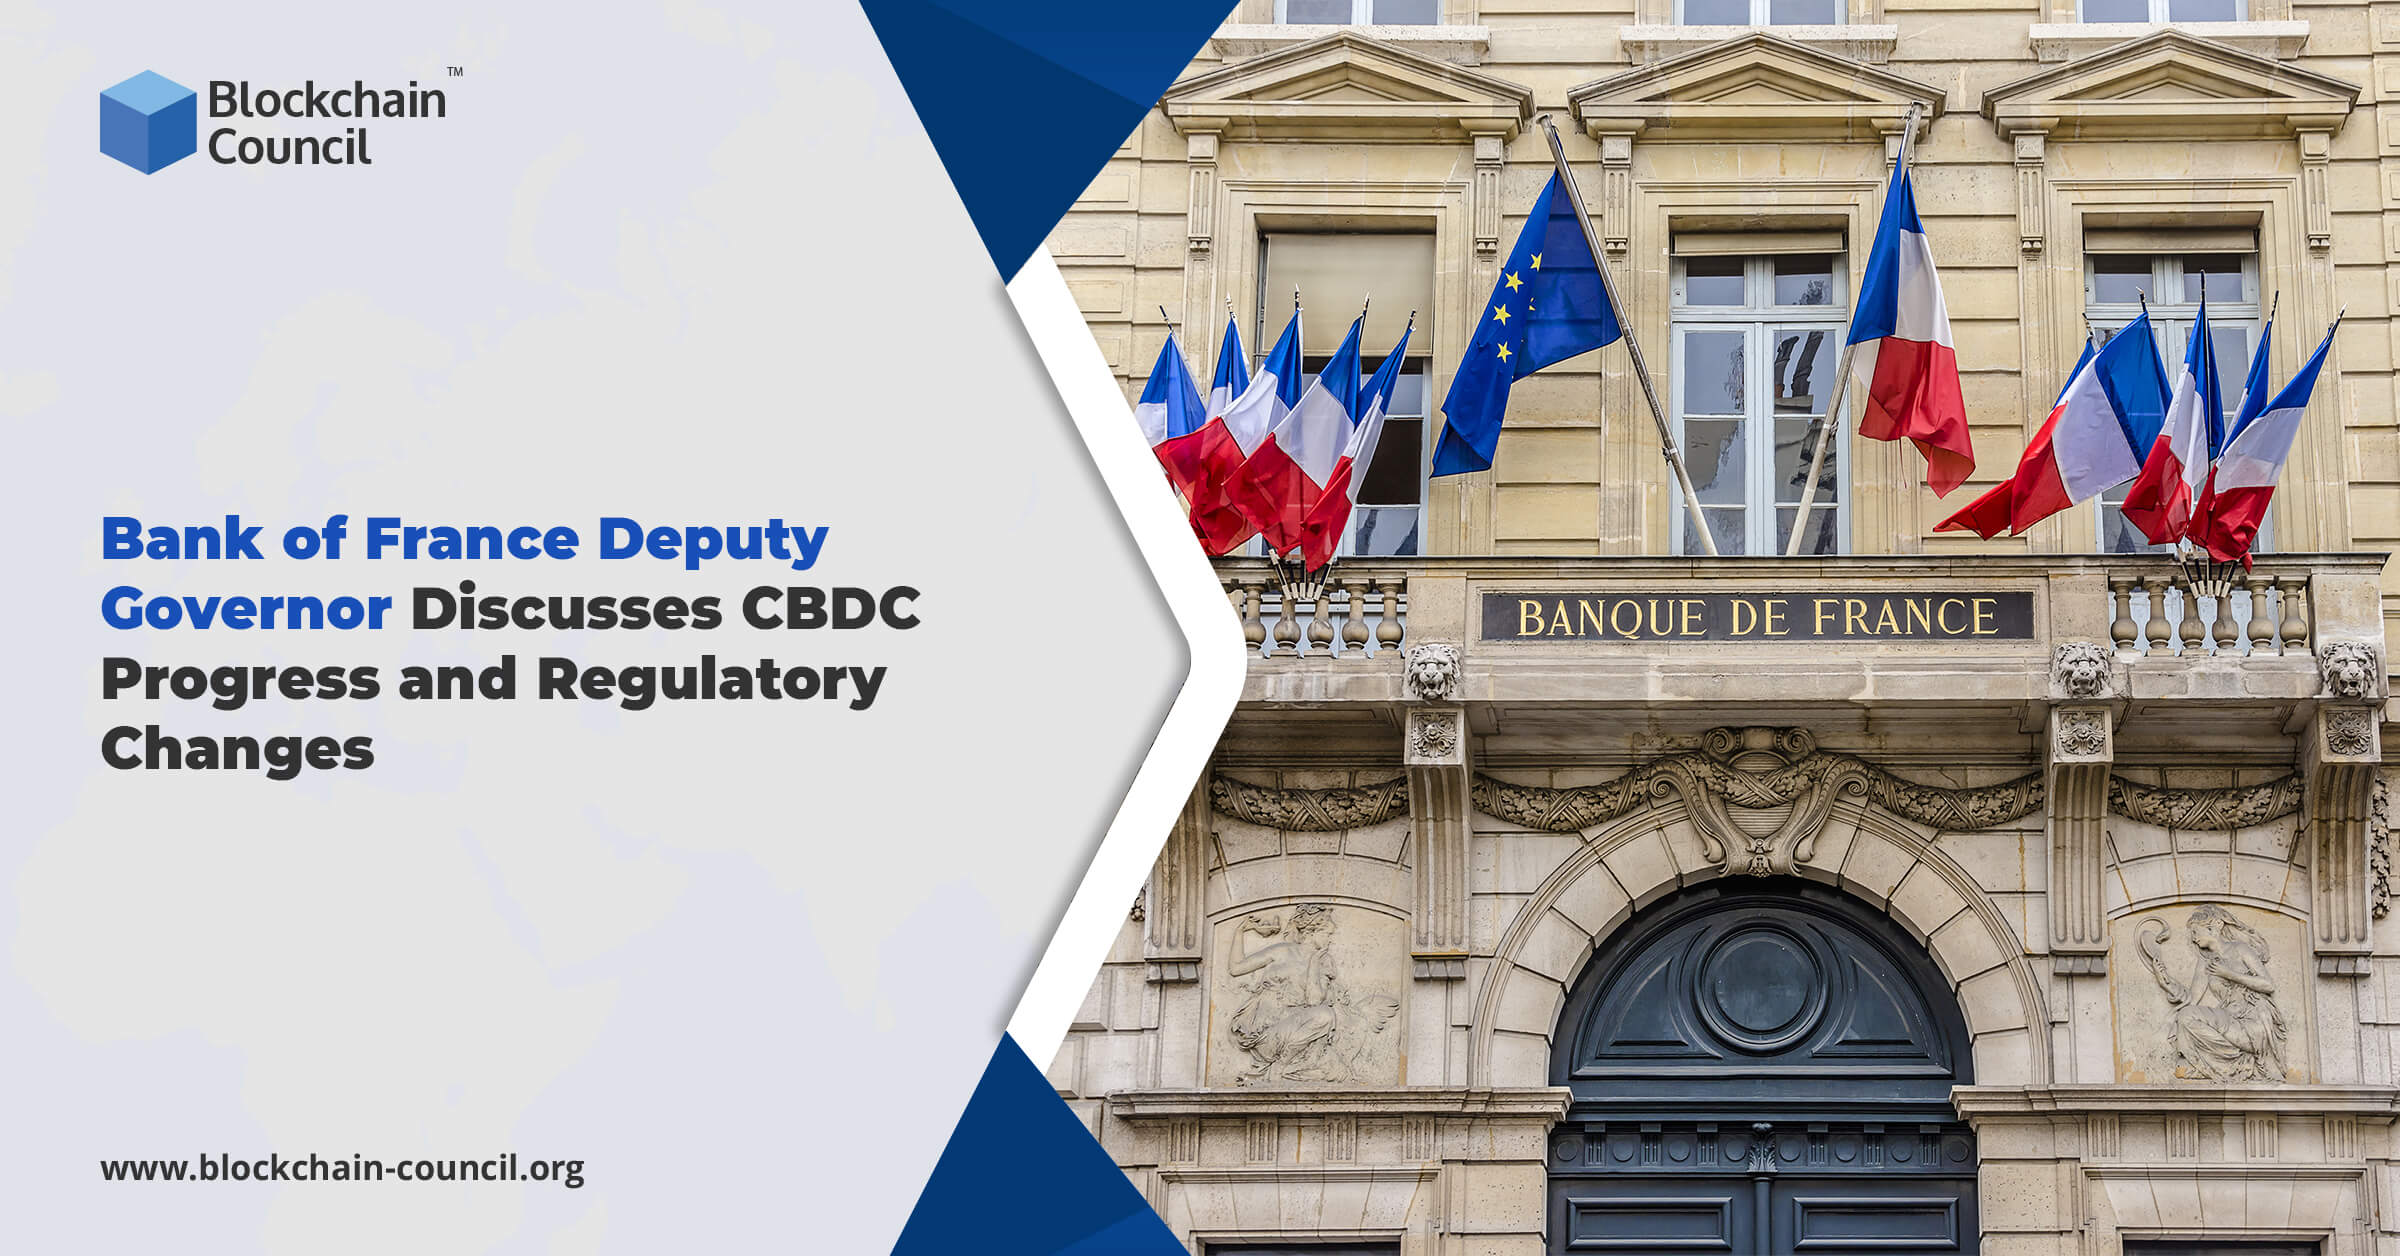 Bank of France Deputy Governor Discusses CBDC Progress and Regulatory Changes